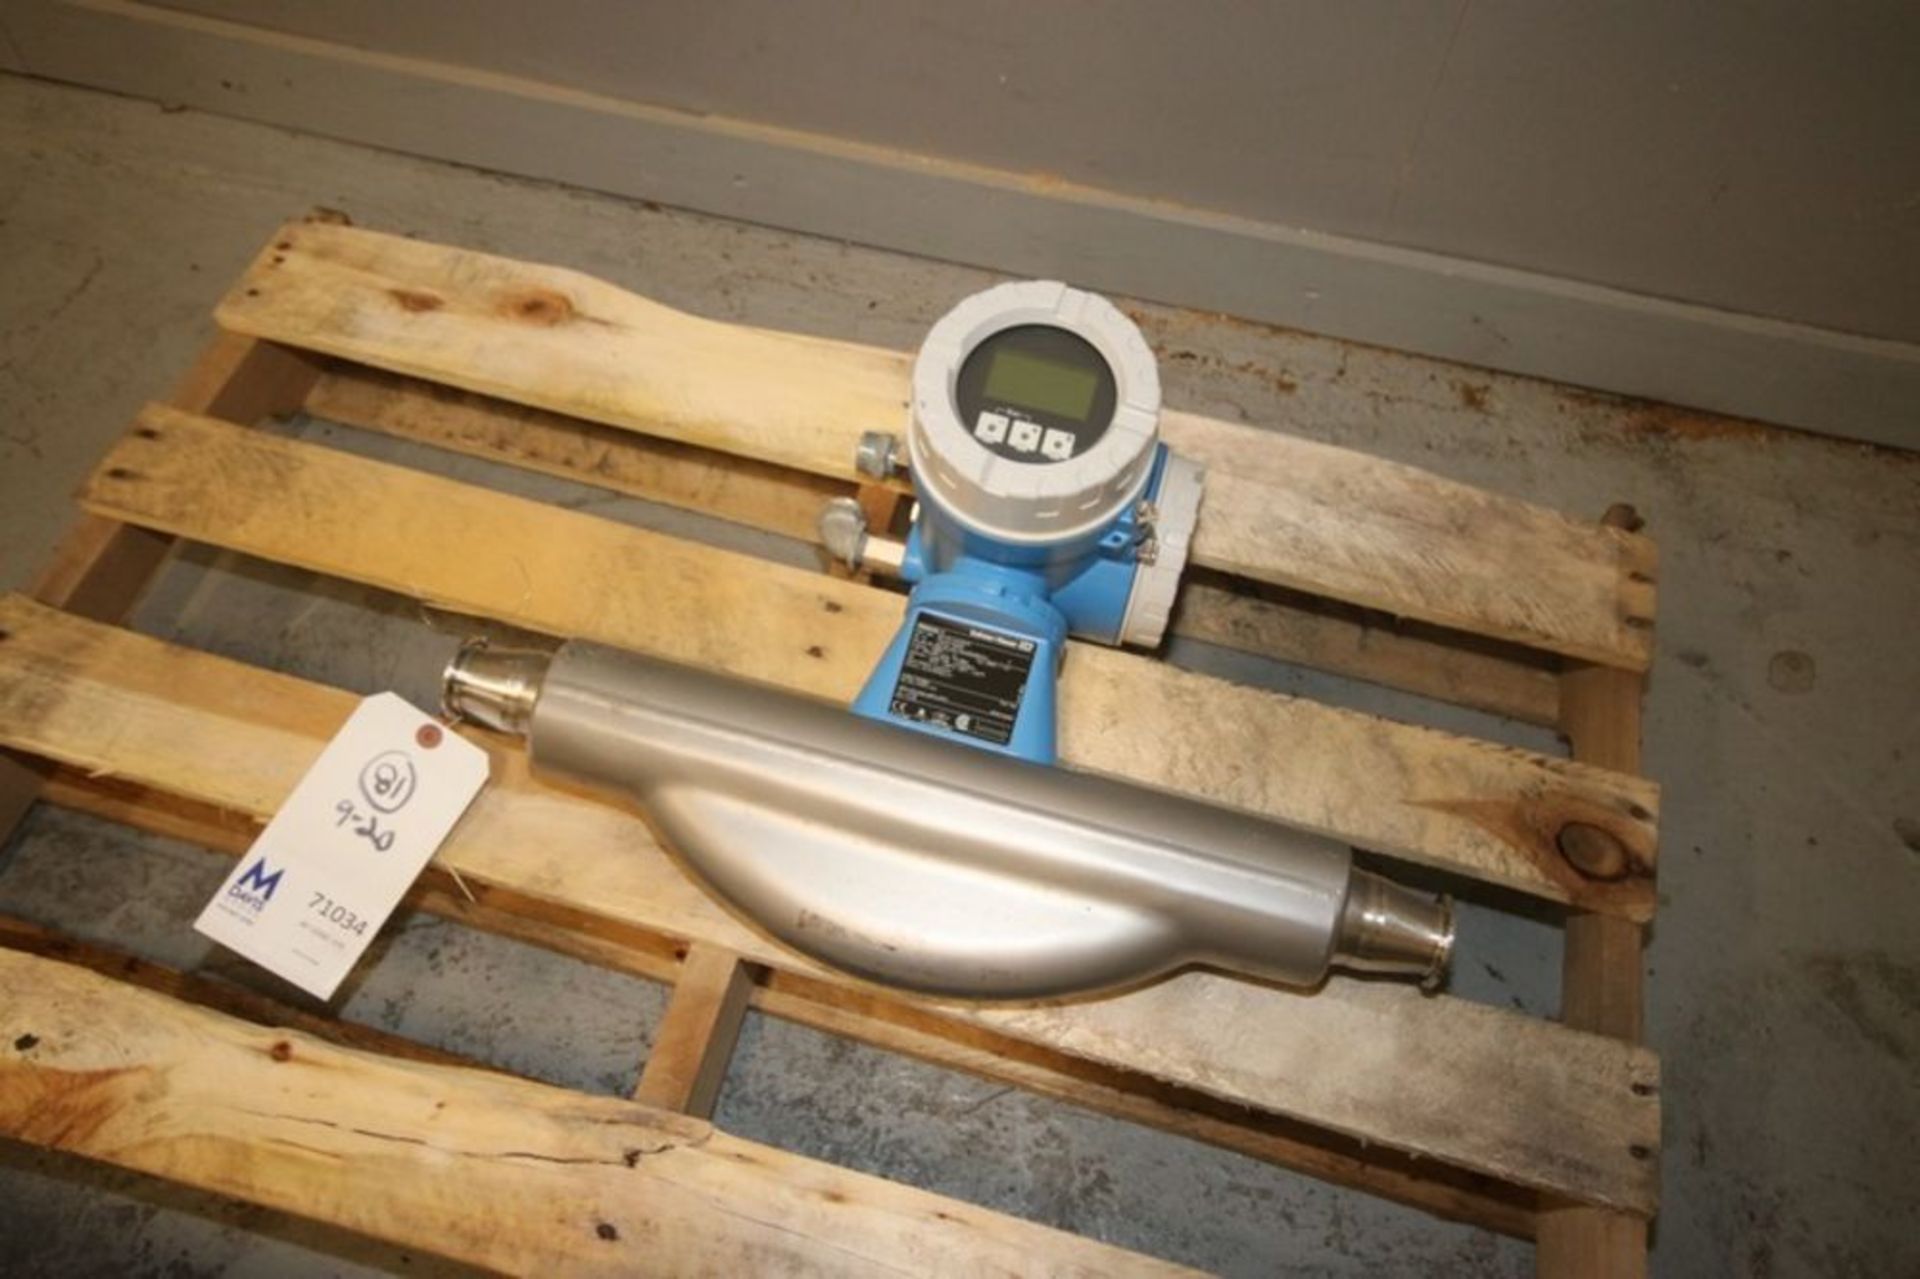 Endress+Hauser S/S Flow Meter, Order Code: 83F40-AA29/0, S/N F5024716000, with Aprox. 1-1/2" Clamp